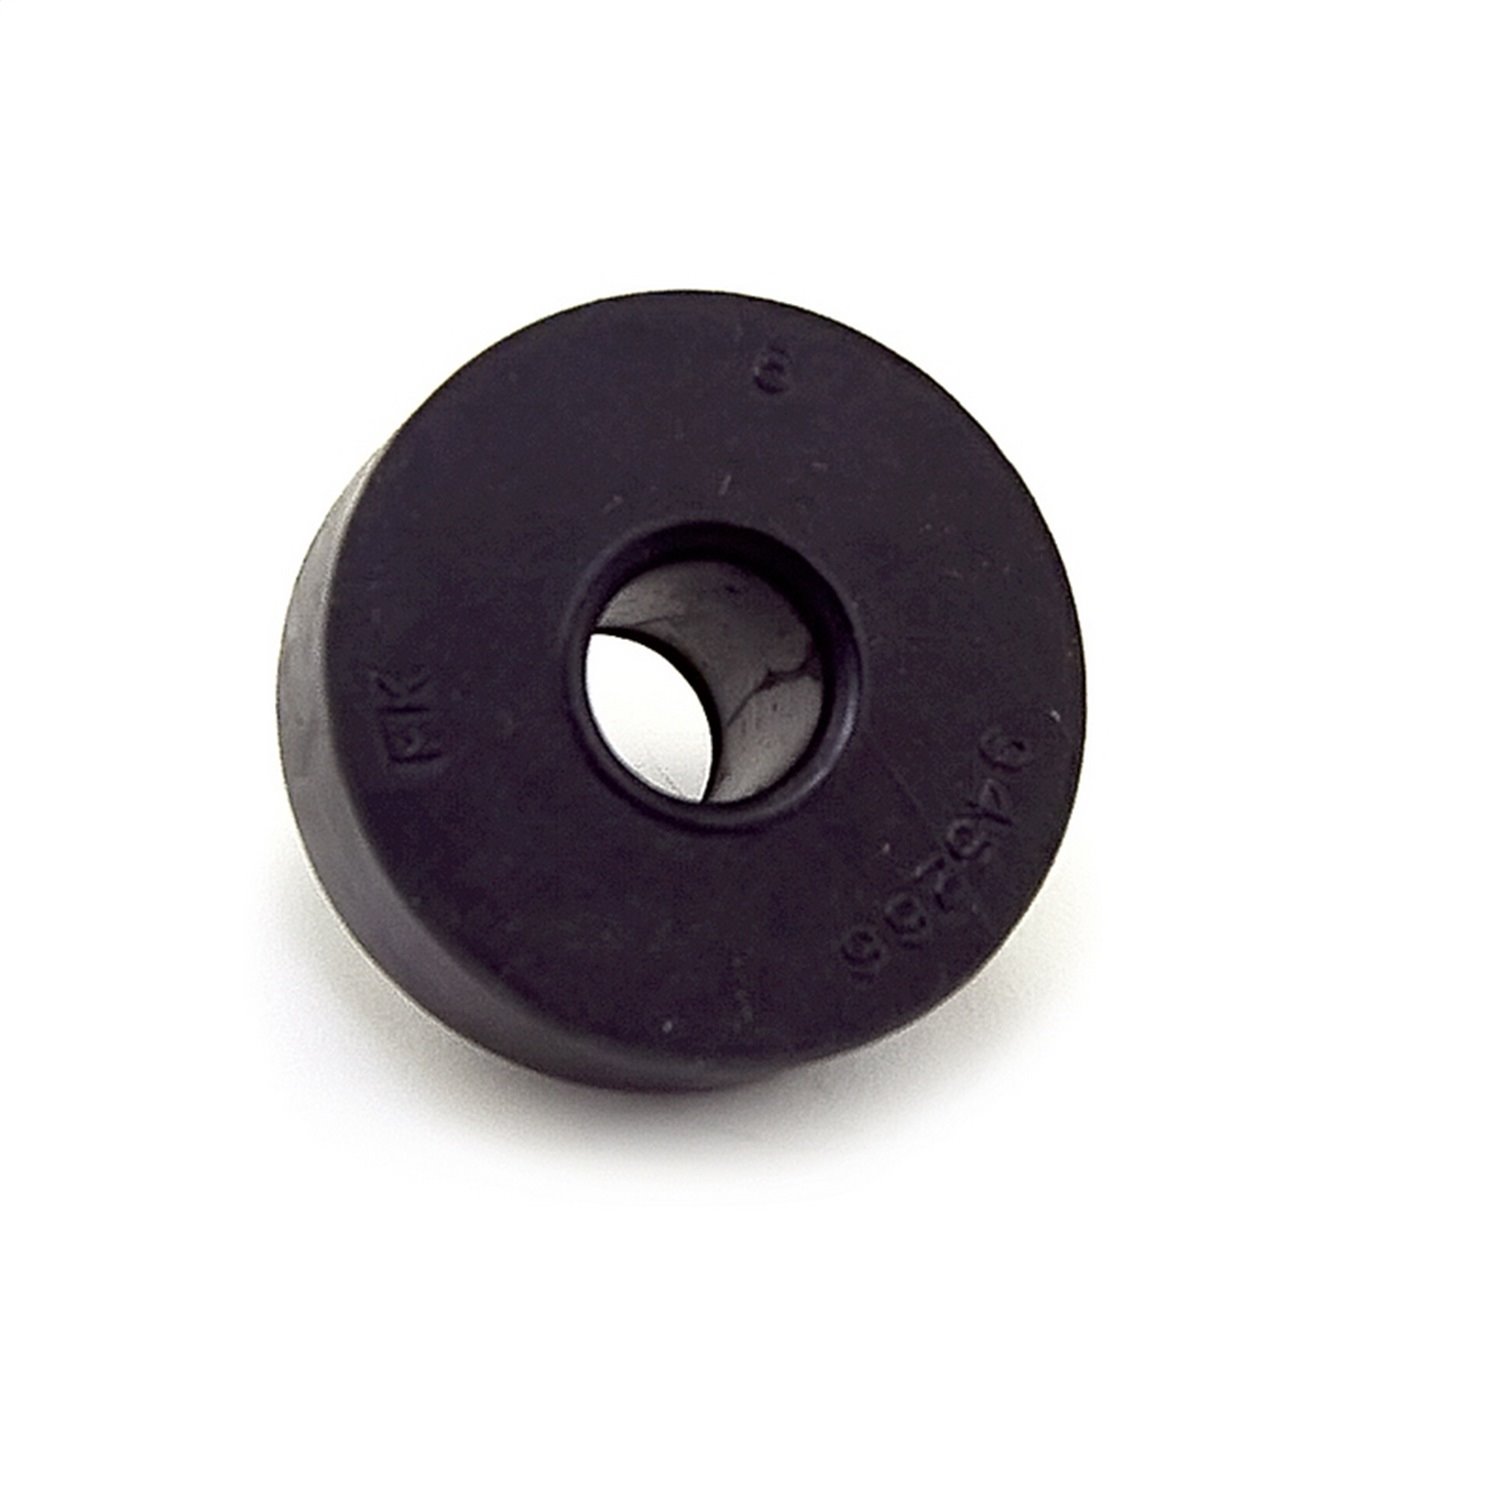 This black transmission stabilizer bushing from Omix-ADA fits 76-86 Jeep CJs with Tremec or Warner m